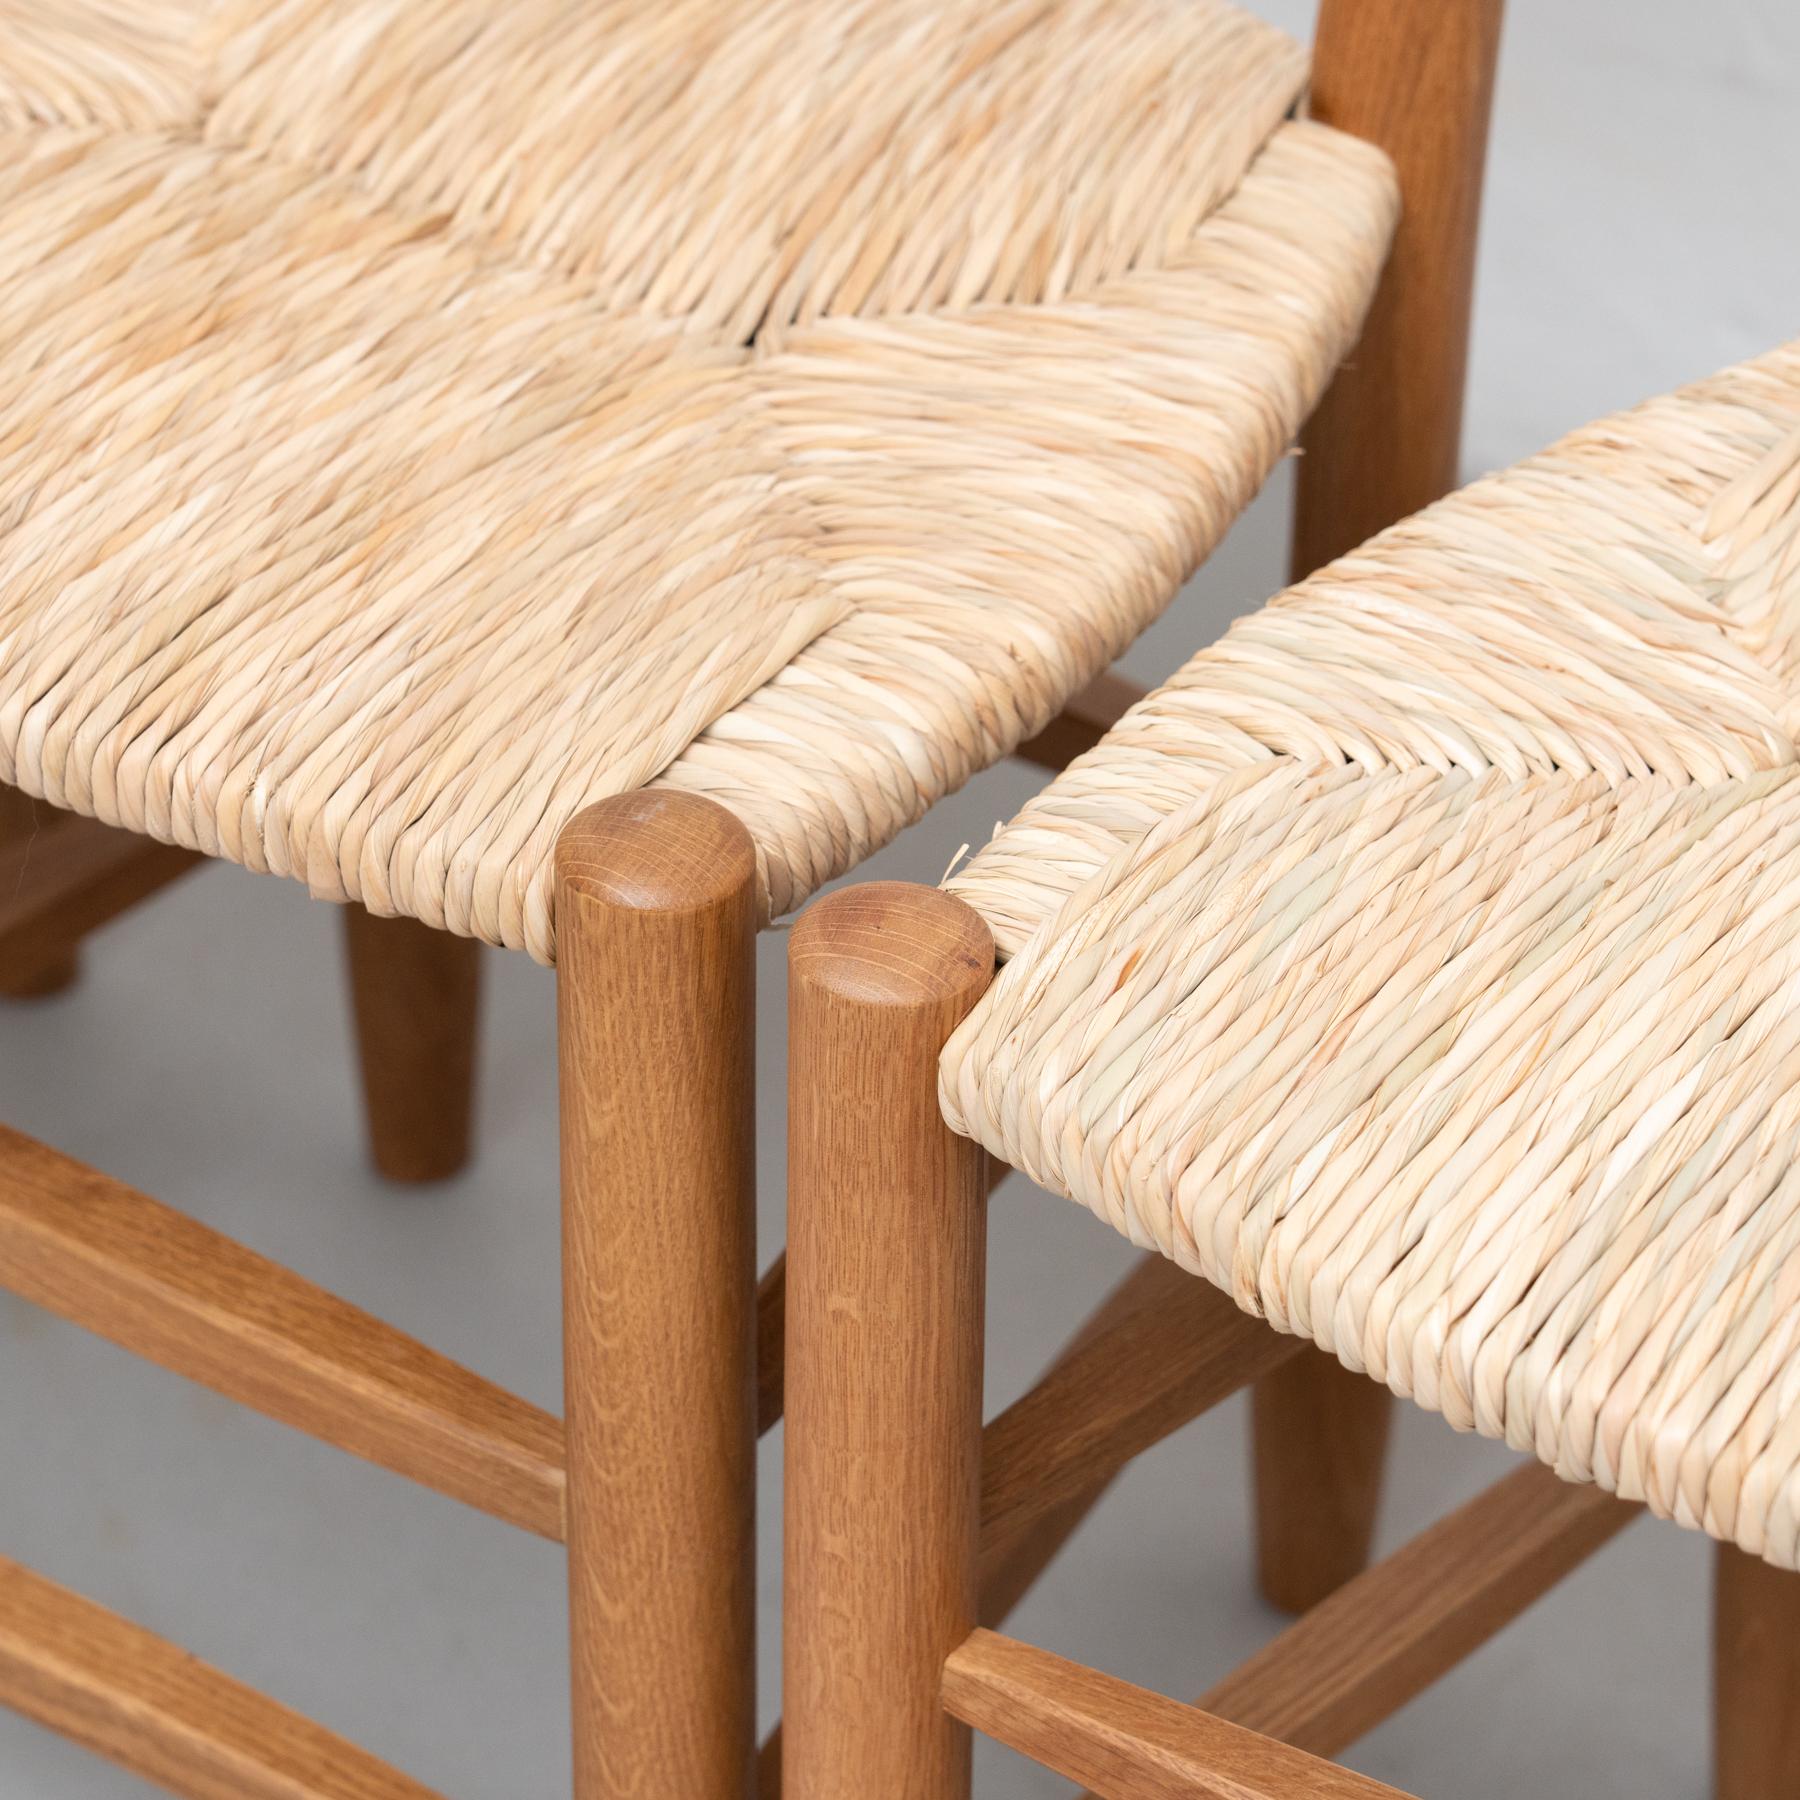 Set of 6 After Charlotte Perriand n.19 Chairs, Wood Rattan, Mid-Century Modern In Good Condition For Sale In Barcelona, Barcelona